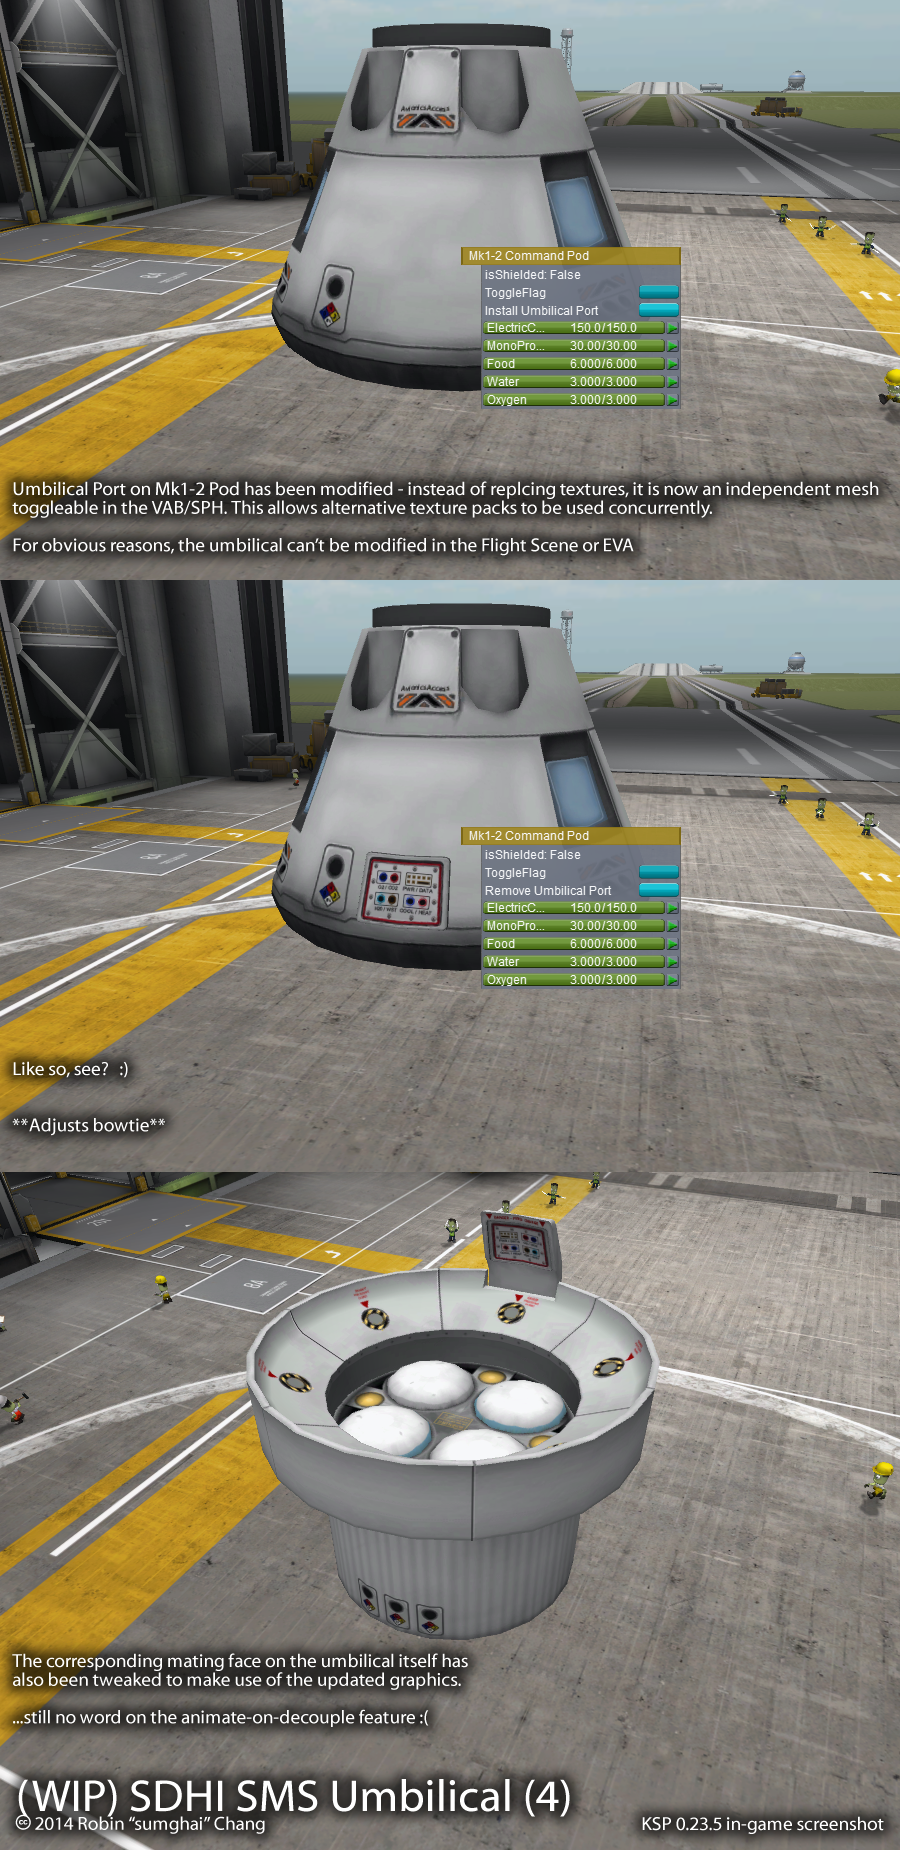 ksp_sdhi_sms_umbilical_wip_9_july_2014_by_sumghai-d7pumj3.png